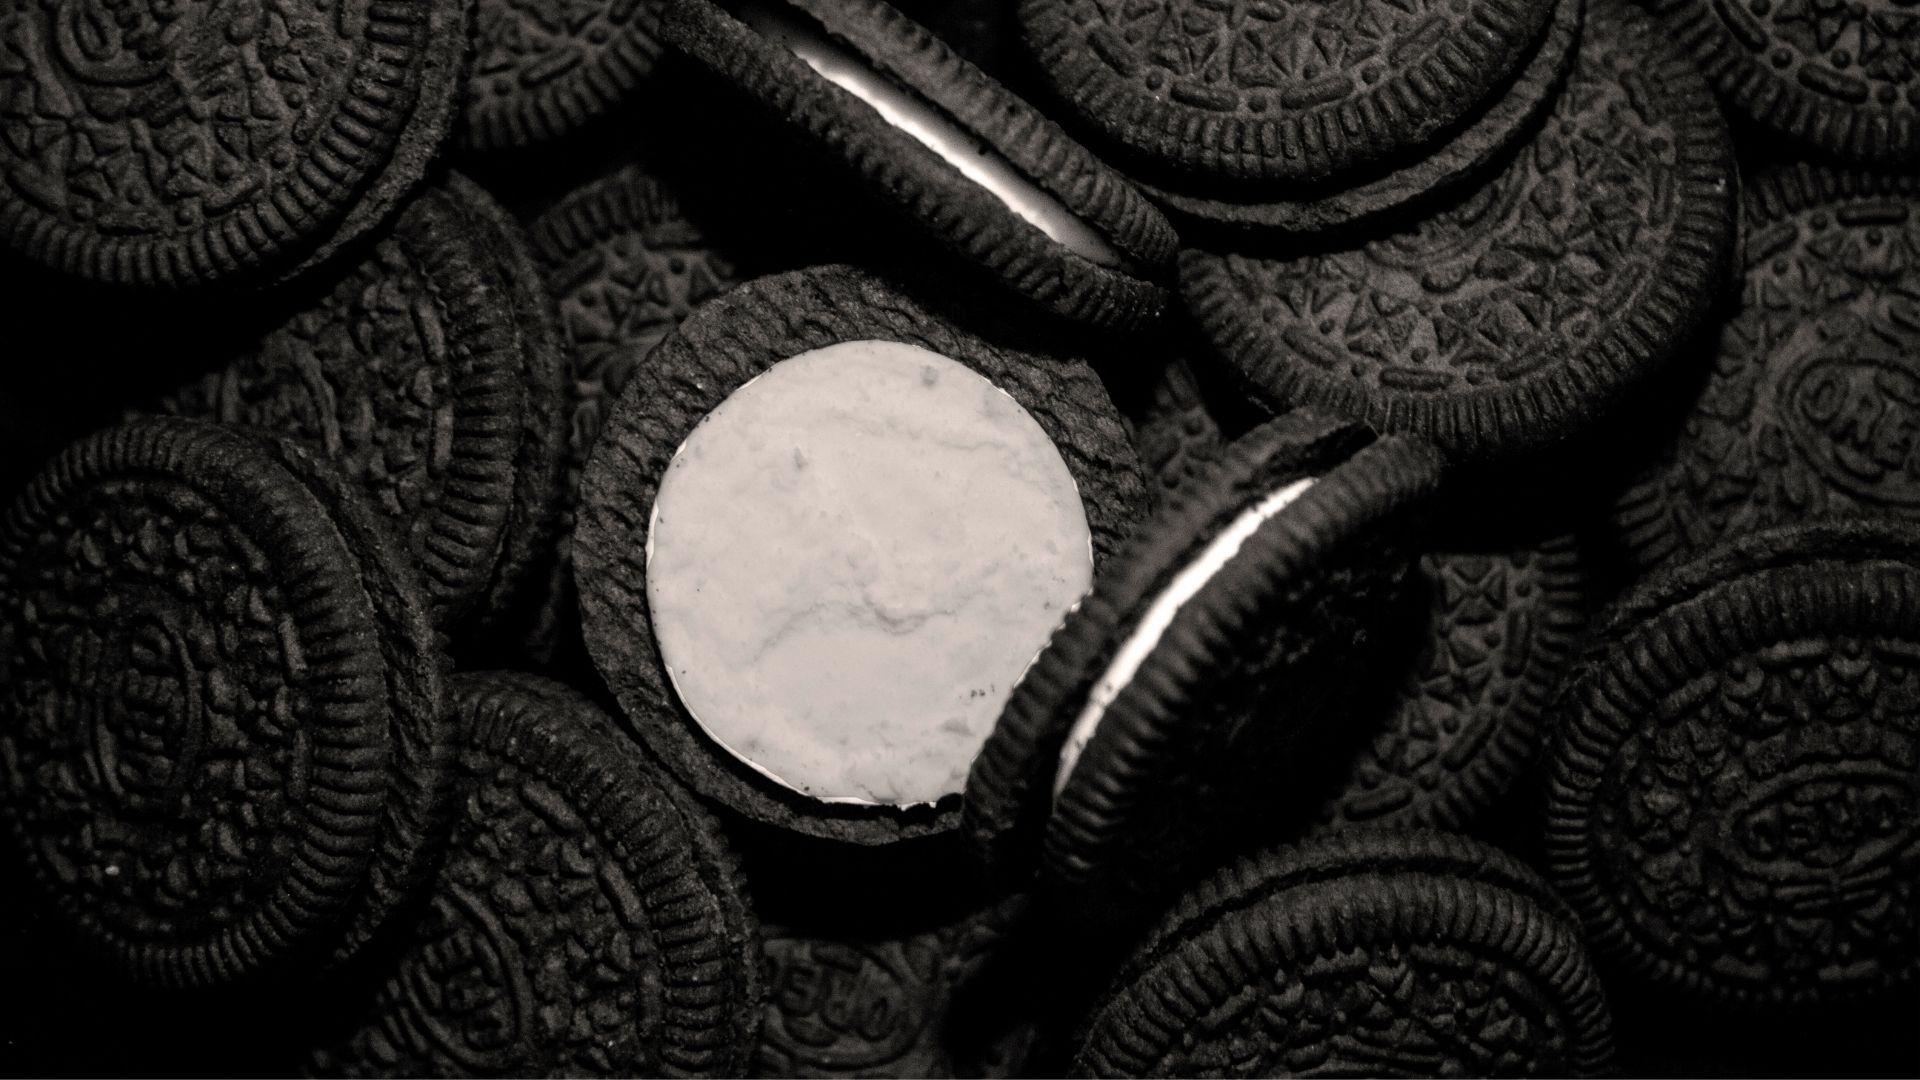 Oreo Cookies: One of the most well-known cookies in the world. 1920x1080 Full HD Wallpaper.